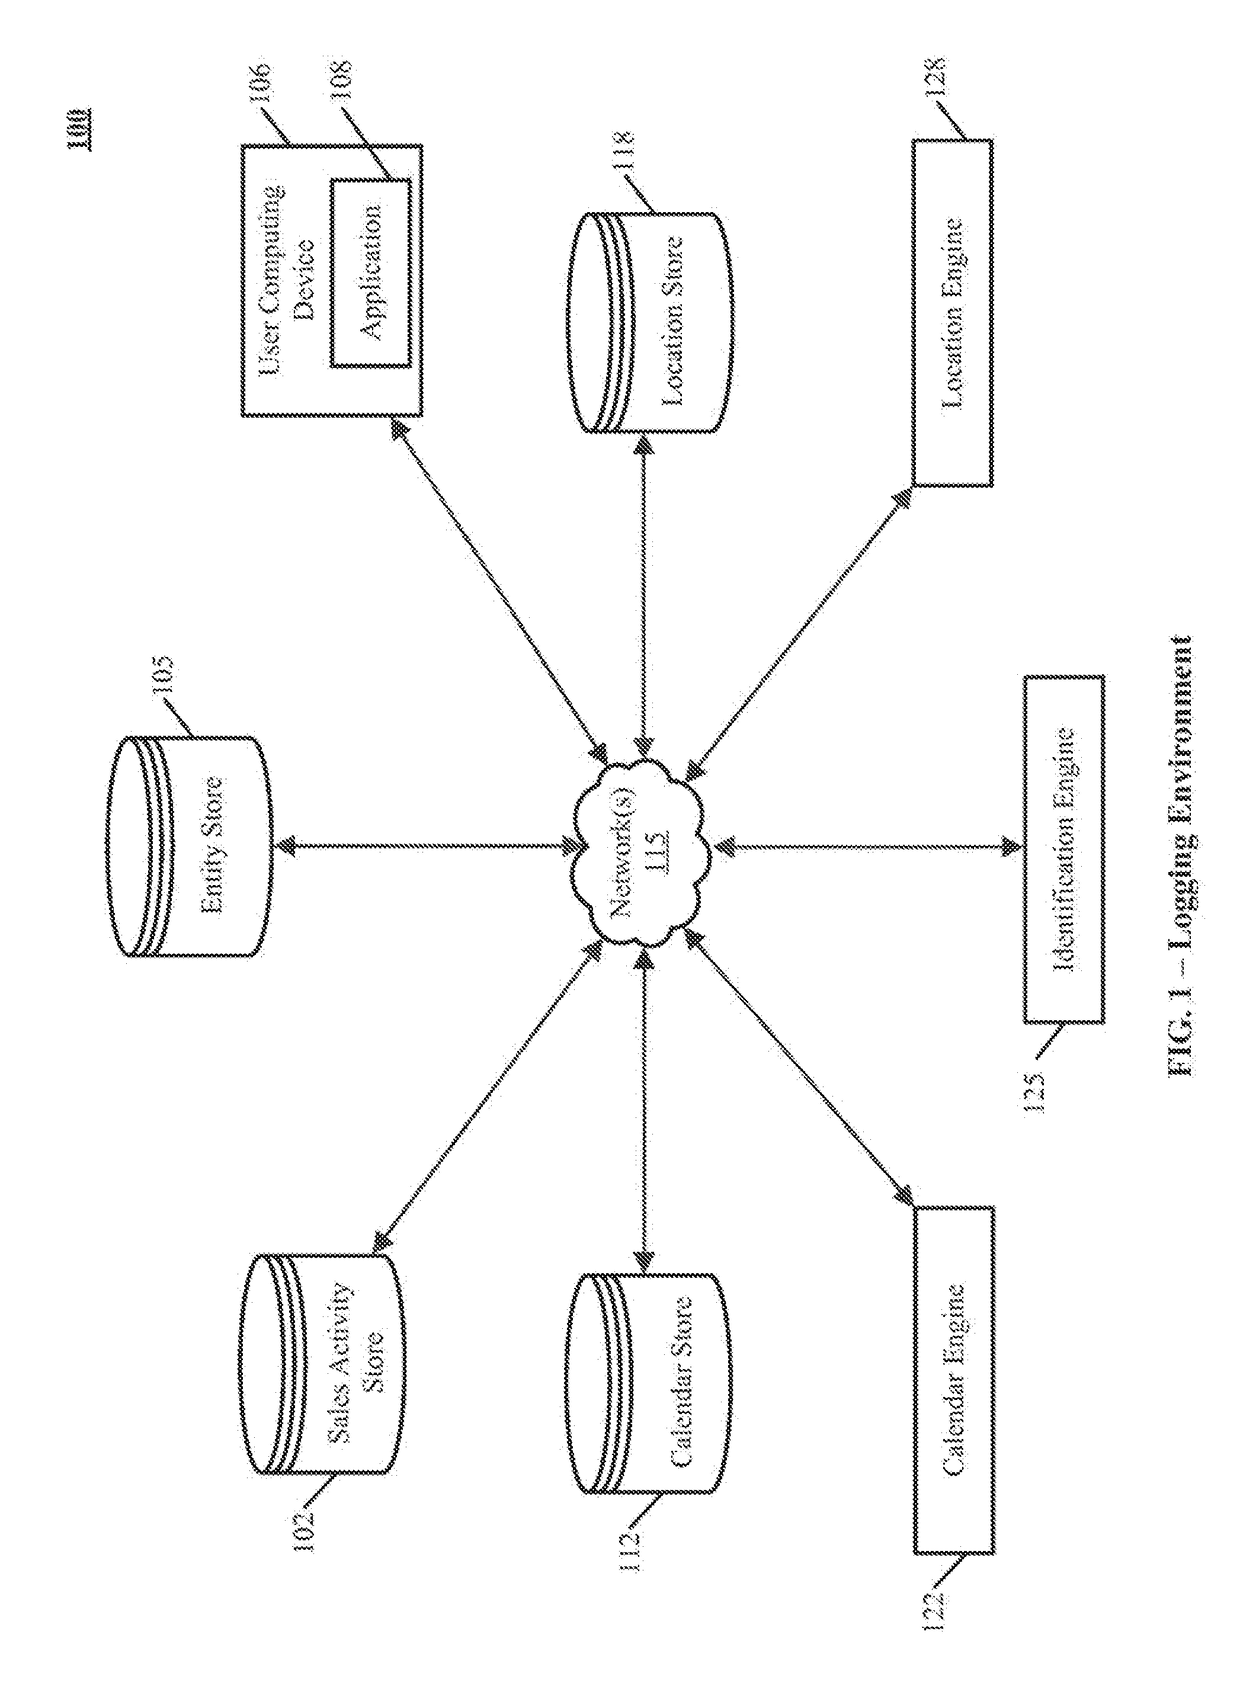 Streamlined data entry paths using individual account context on a mobile device